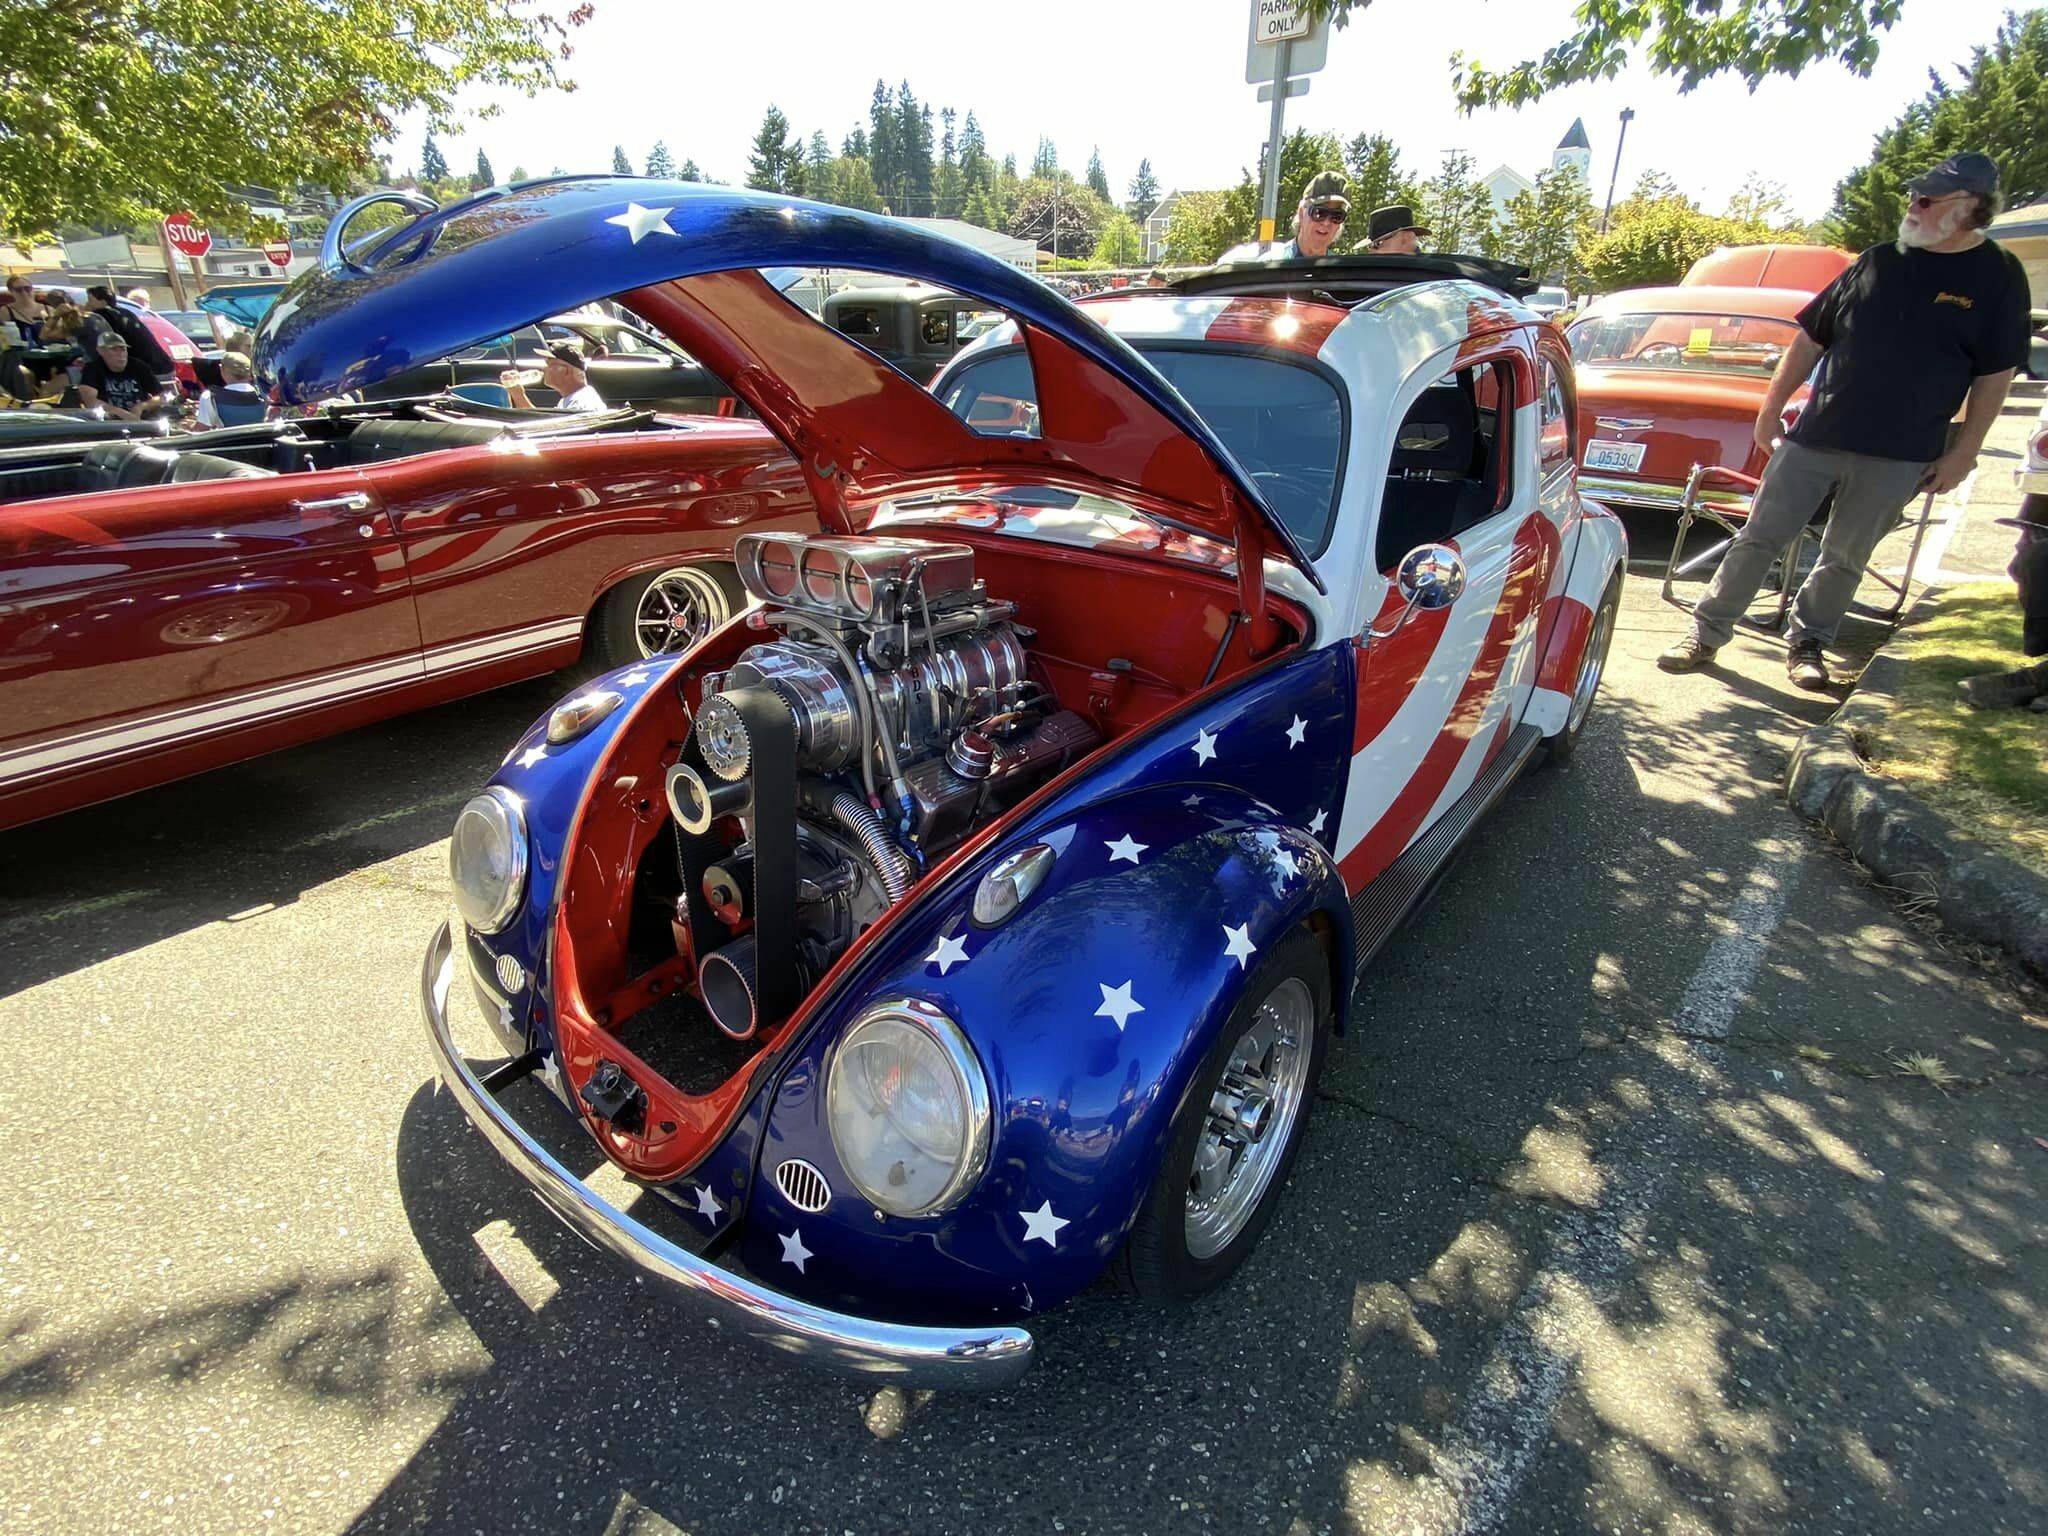 Some of the vehicles in the show take on a patriotic theme.